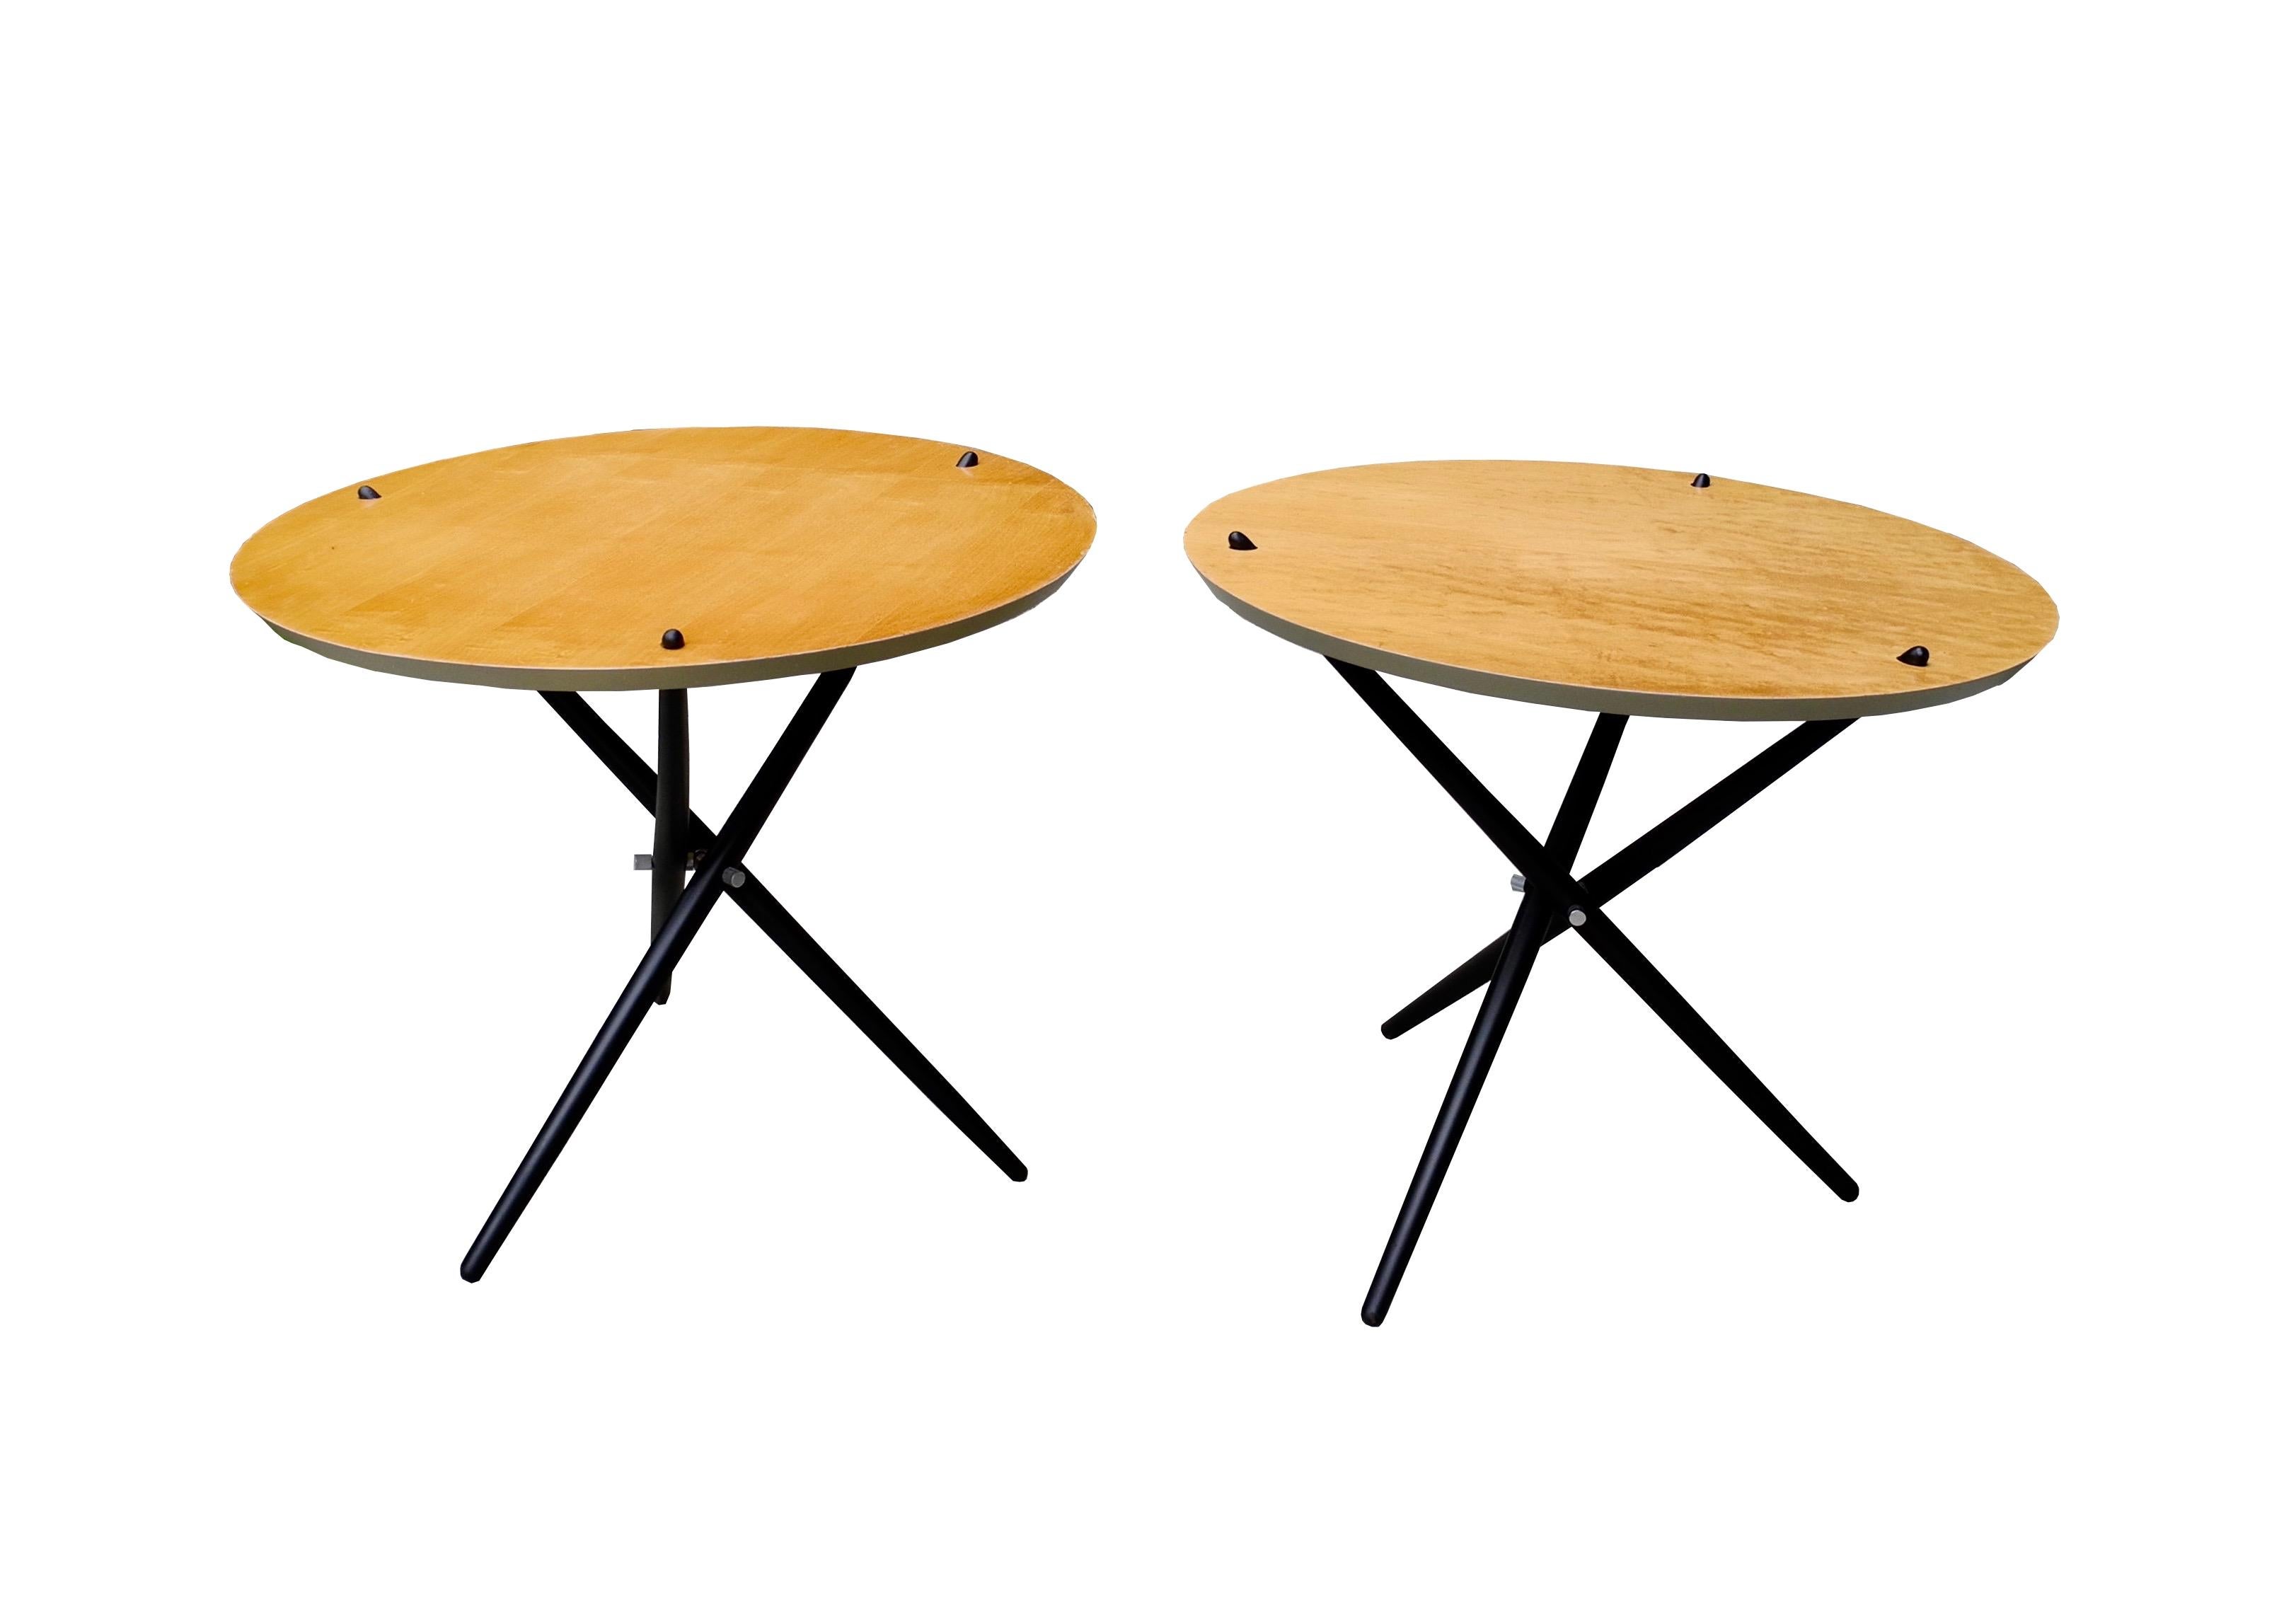 These tripod tables can act as nightstands or side tables. Made of maple and painted wood, the design is signature Hans Bellmann.